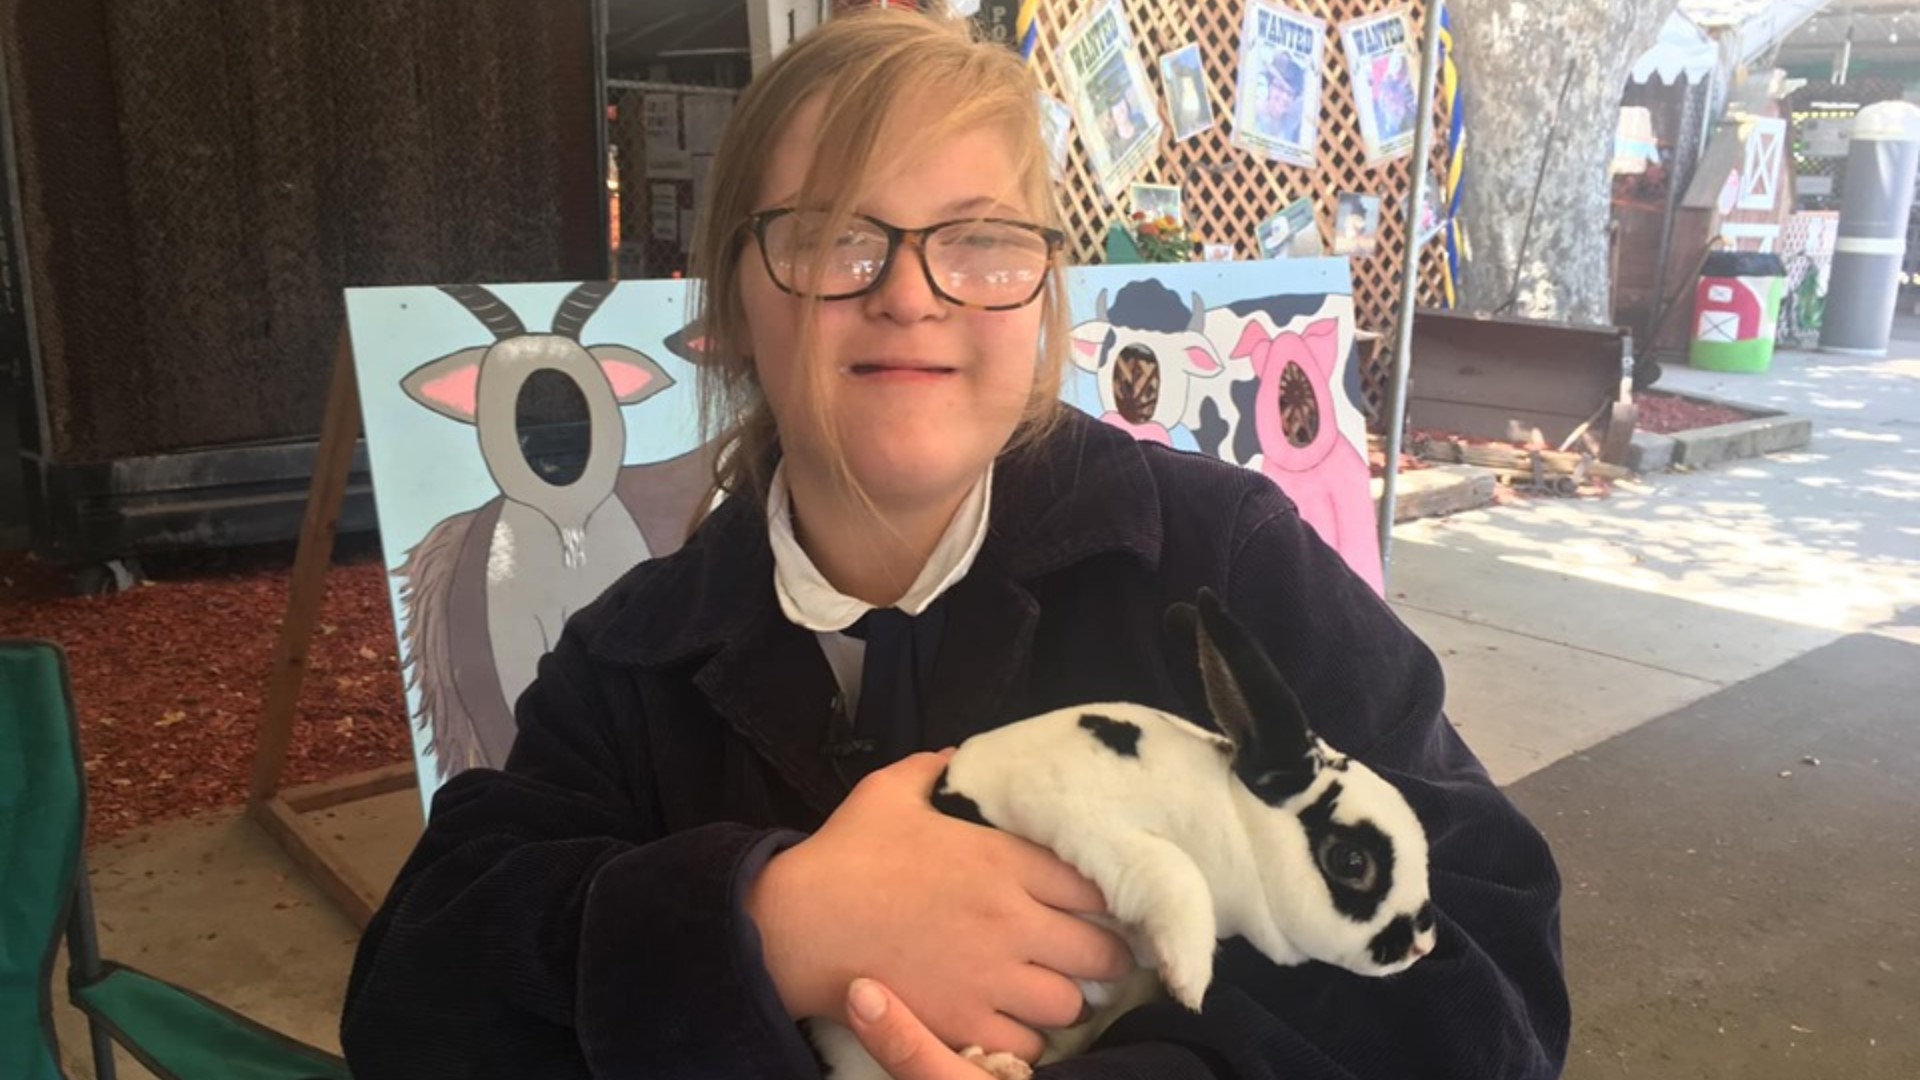 15-year-old Abbie Milligan has won and placed numerous times showing rabbits, cows, cavies and more at the Stanislaus County Fair. She has Down Syndrome, but that has in no way stopped her from being a fierce competitor.